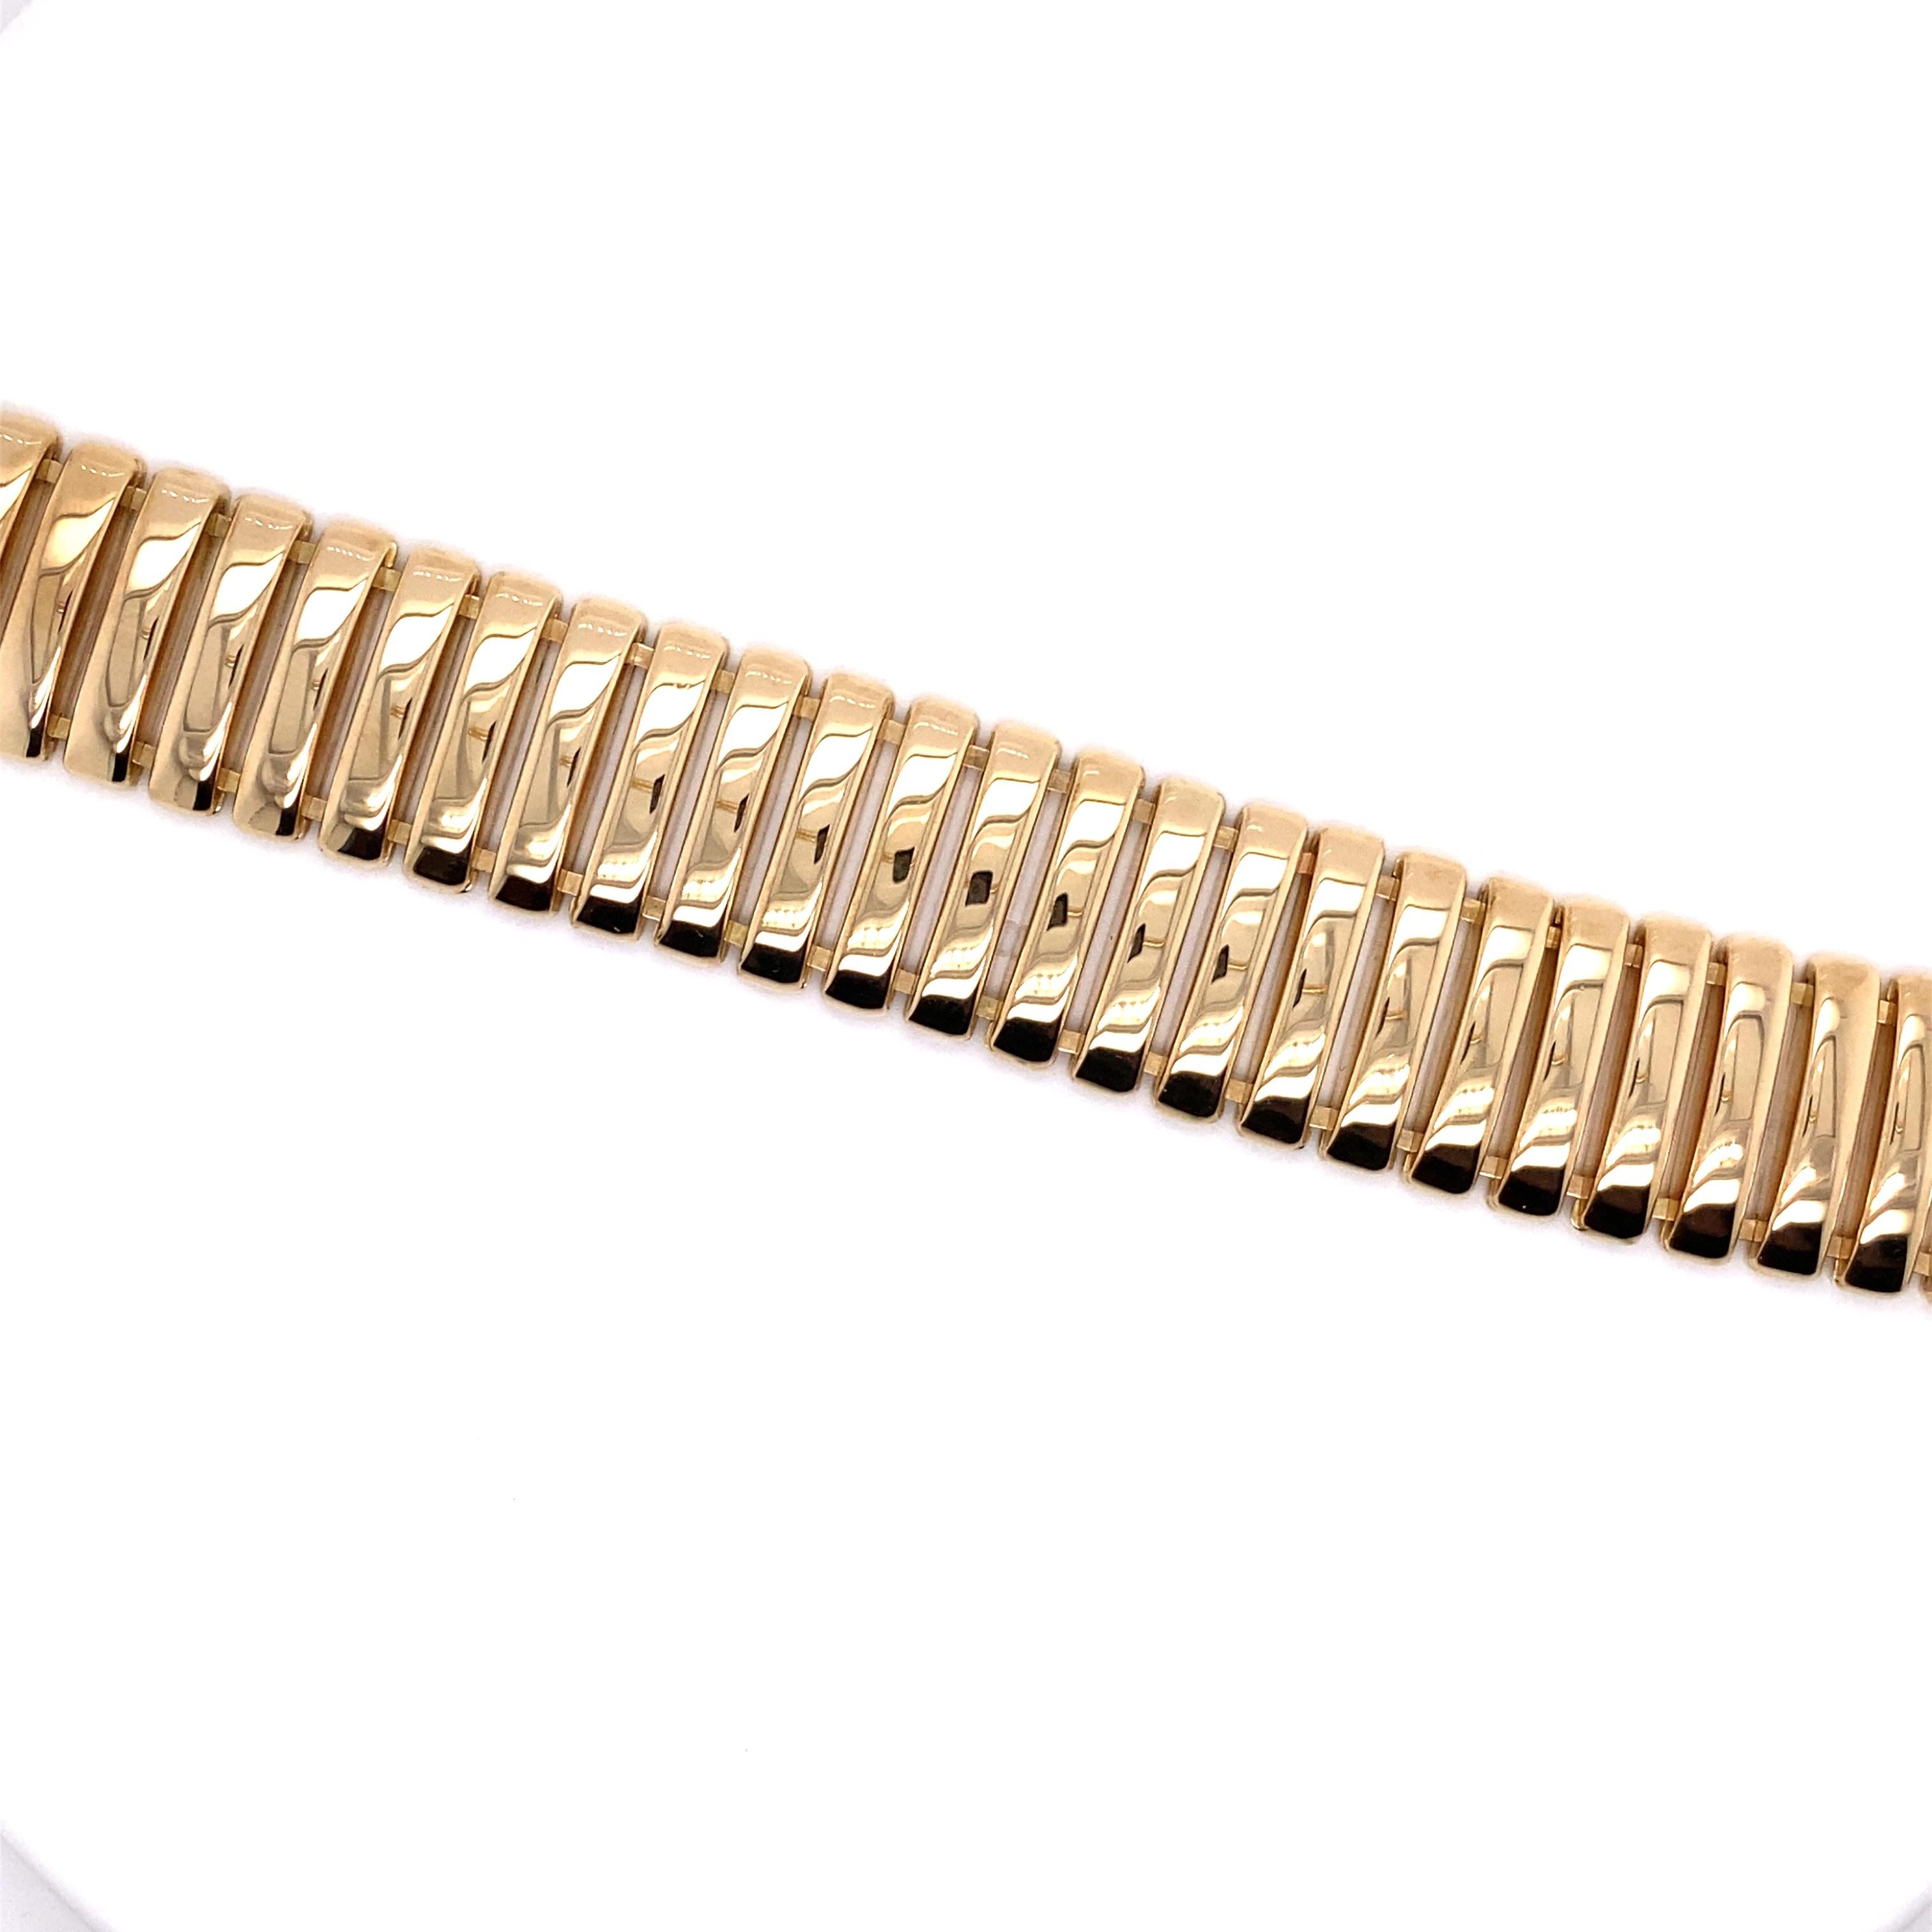 Vintage 1990's 14K Yellow Gold Italian Wide Link Bracelet - The Italian made snake design bracelet measures .75 inches wide and 7.25 inches long and features a hidden plunger clasp. The bracelet weighs 40.49 grams.